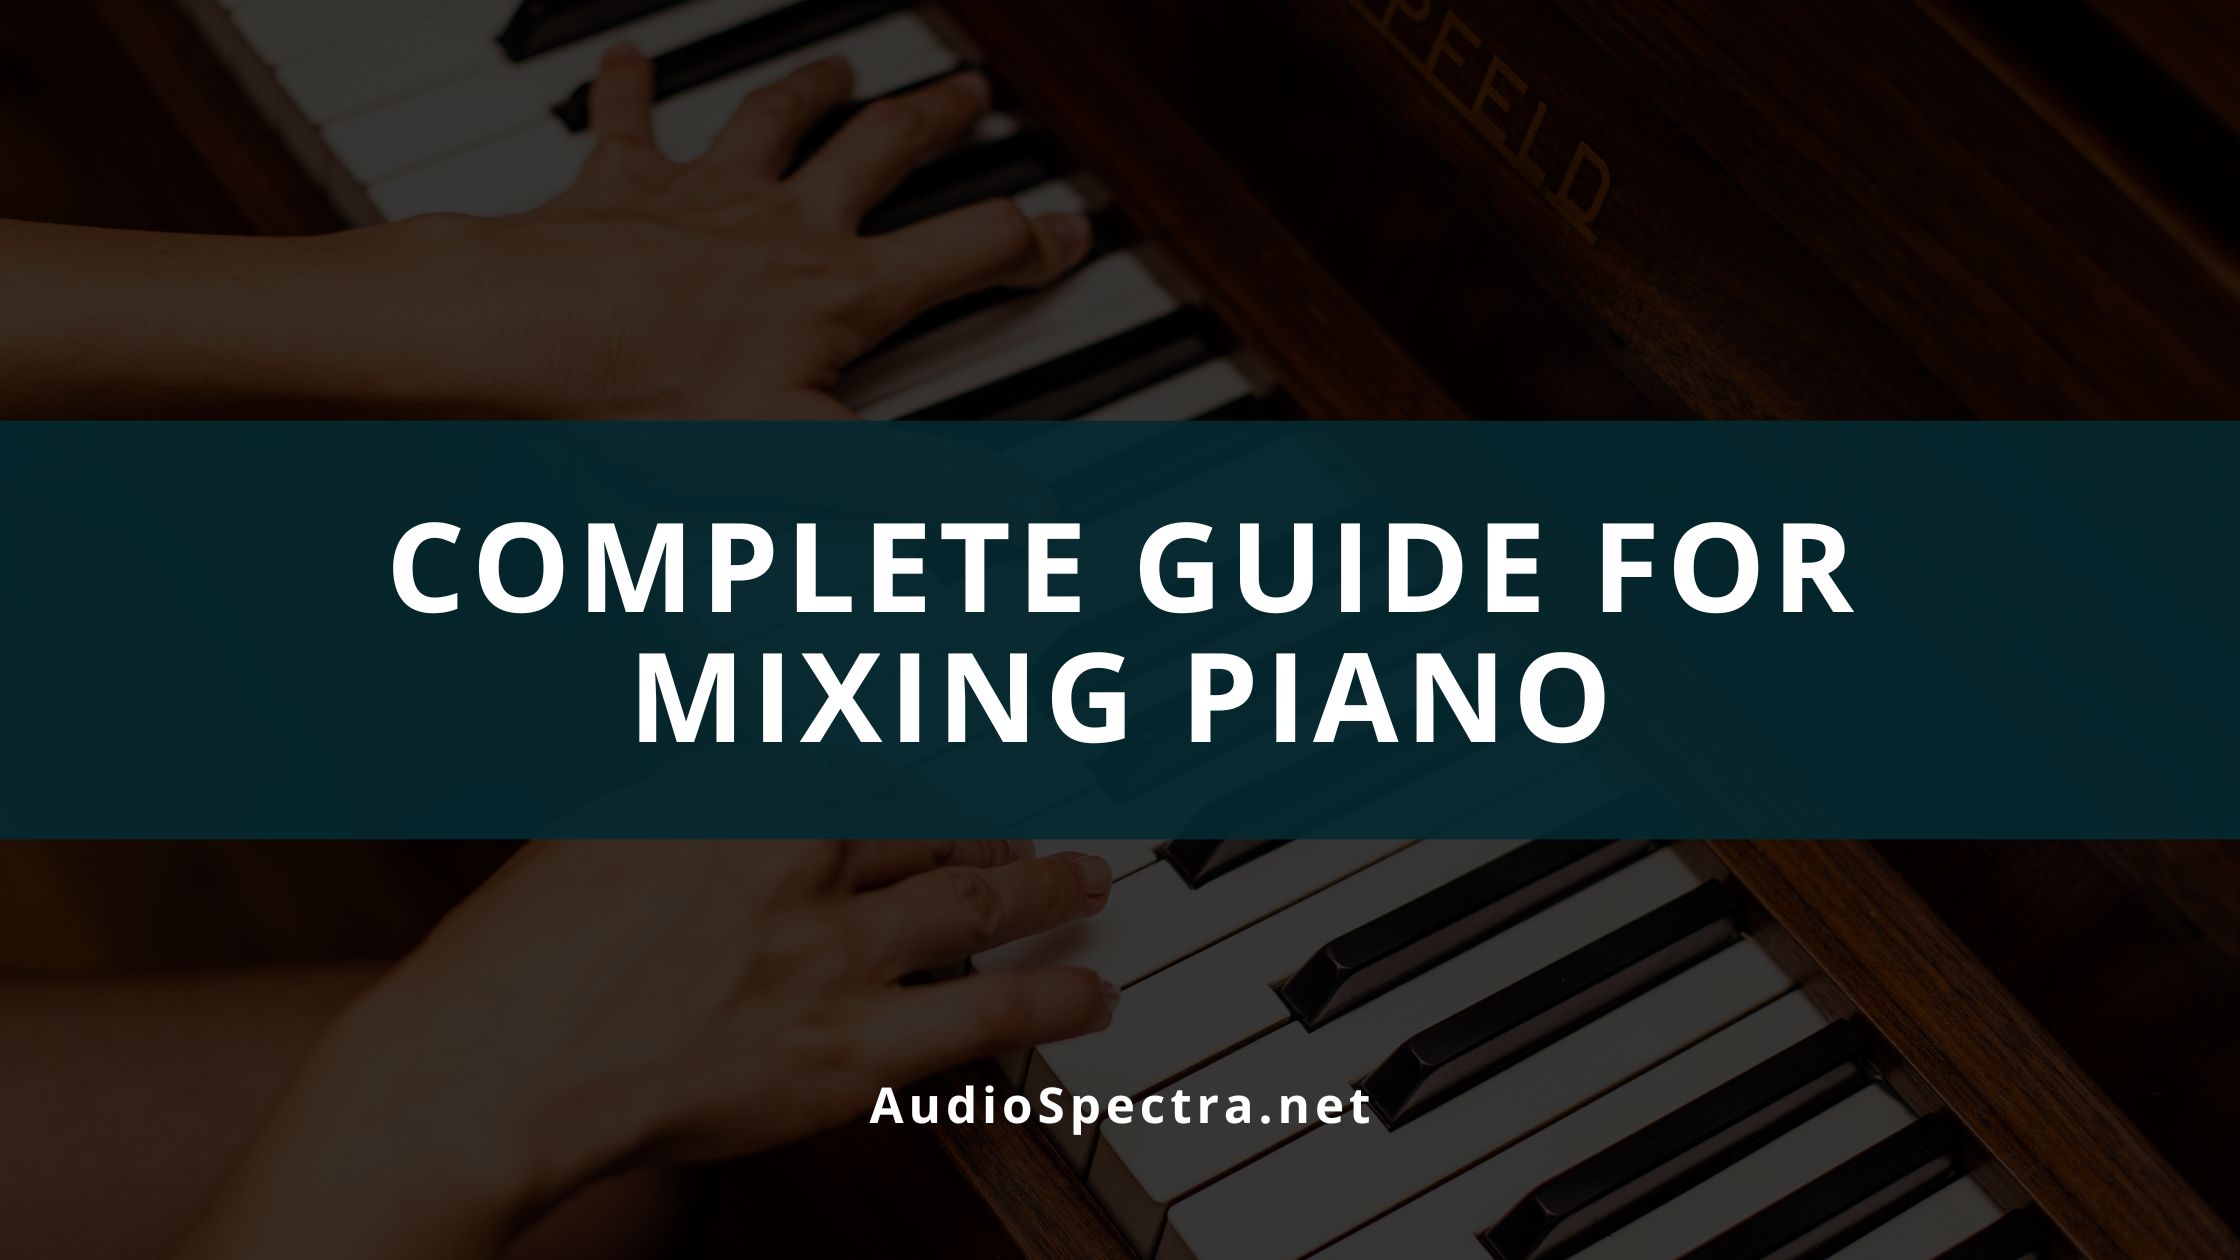 How to Mix Piano